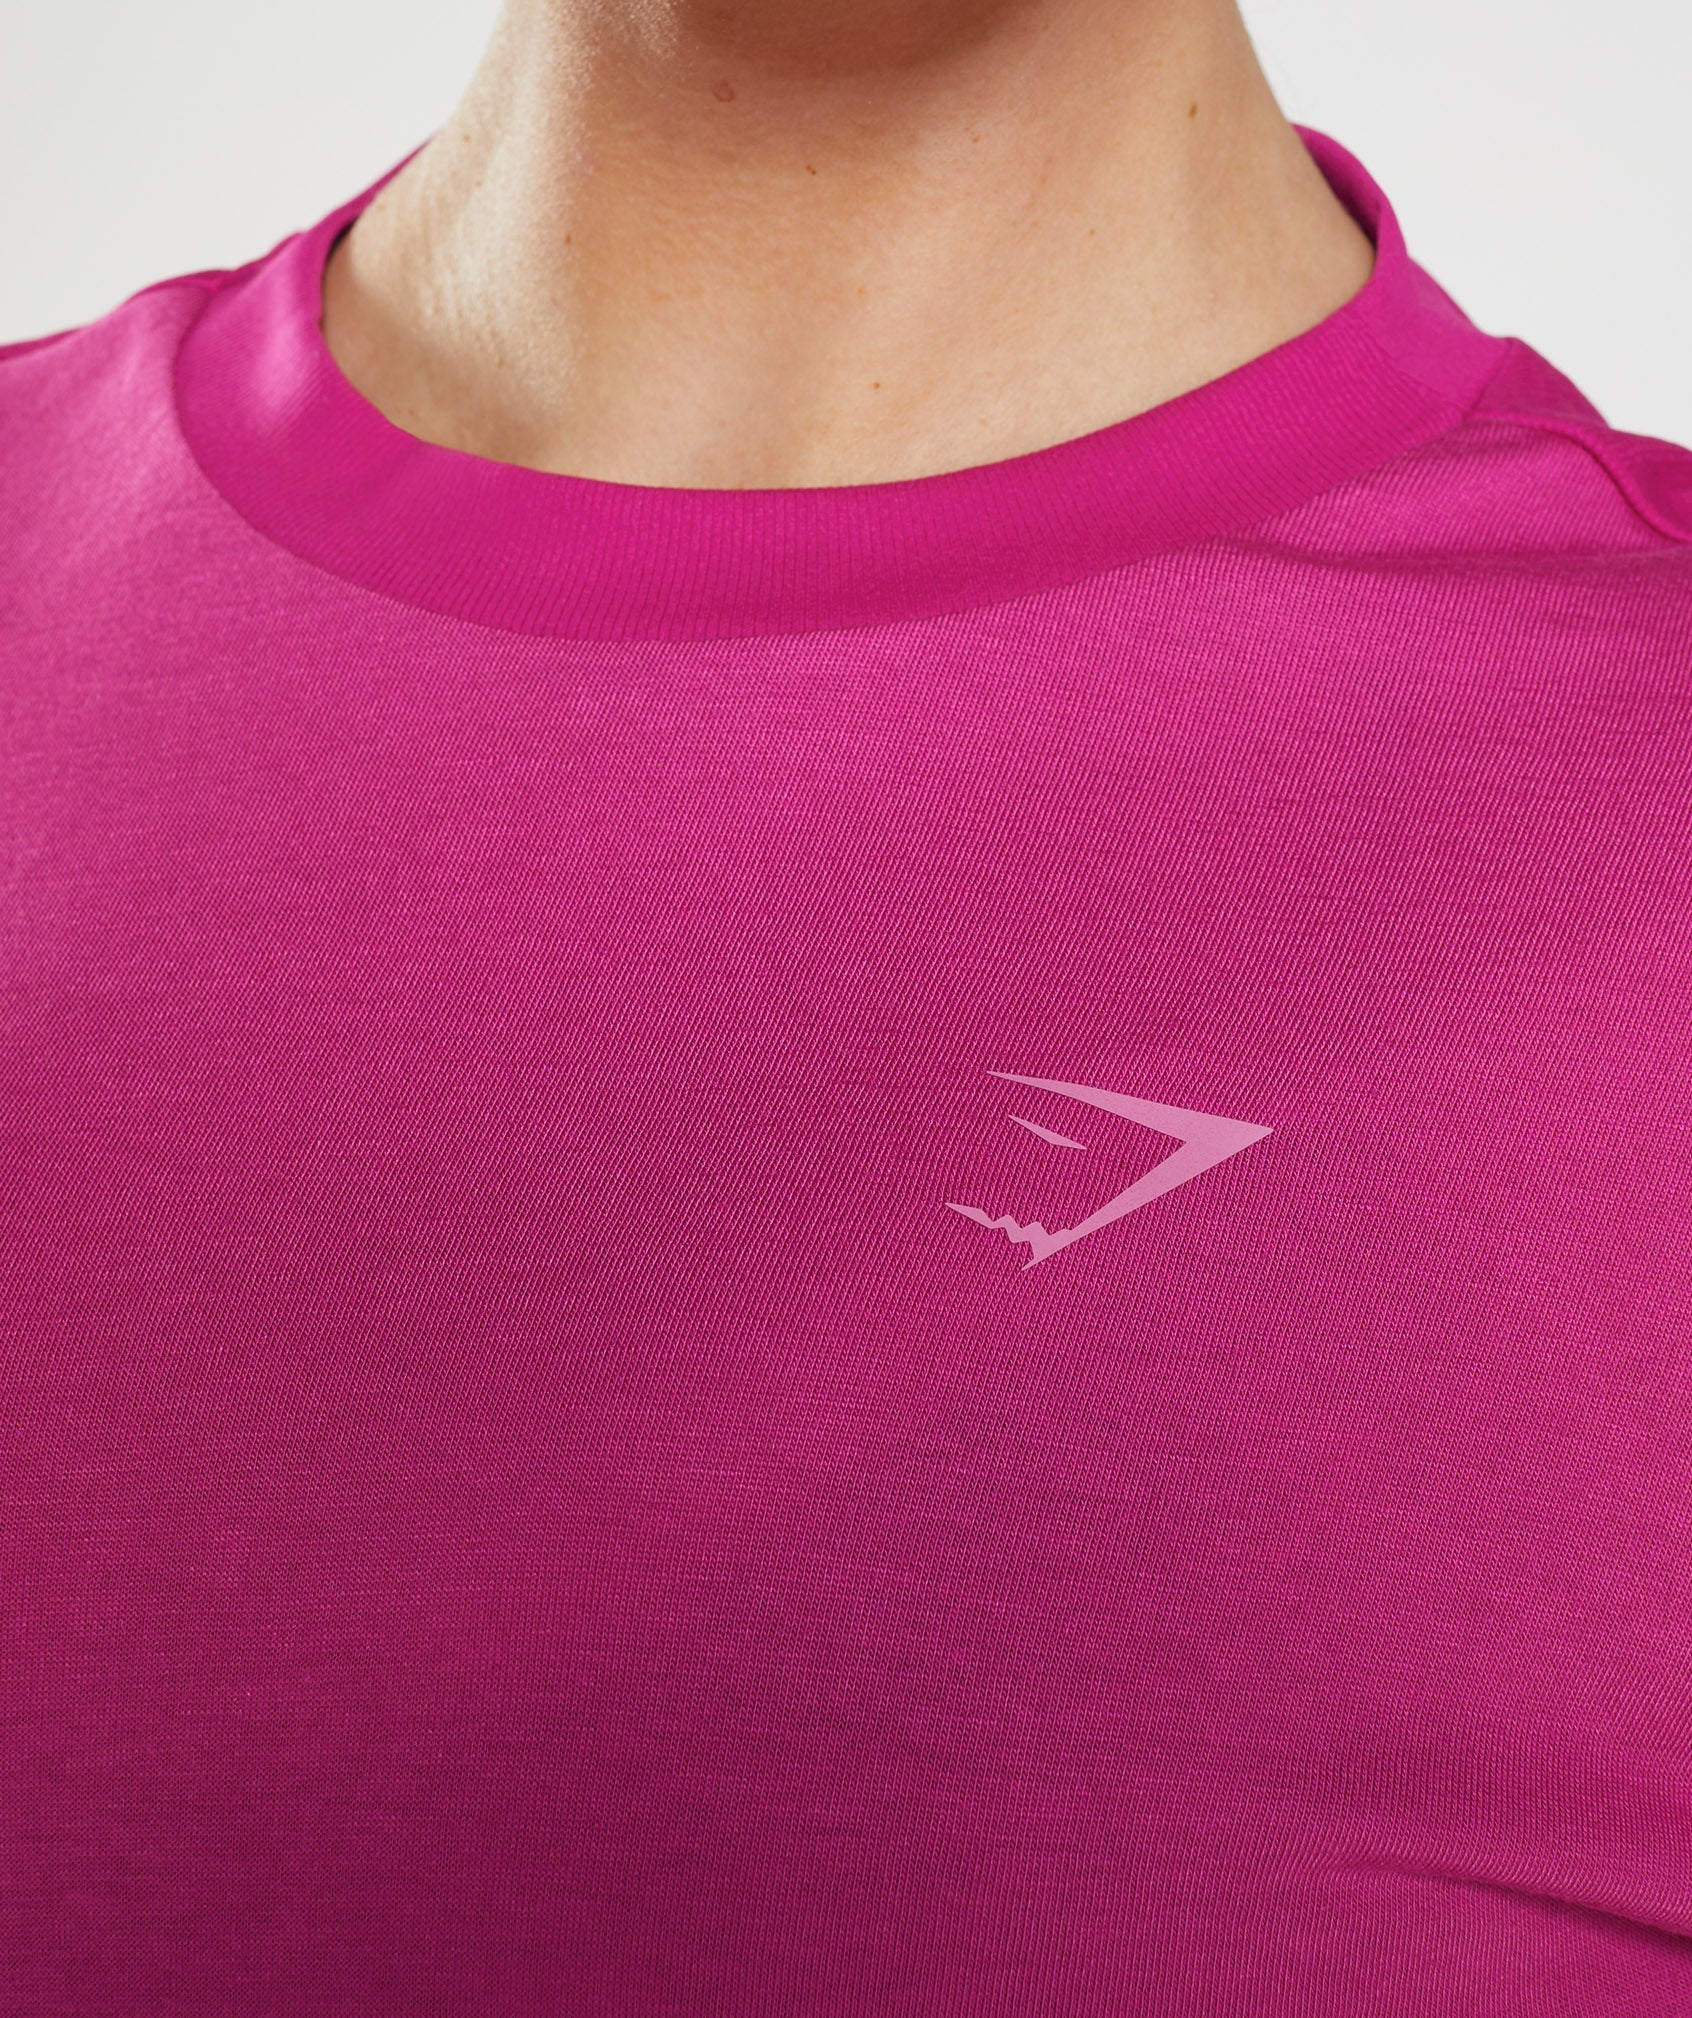 GS Power Midi Top in Magenta Pink - view 5